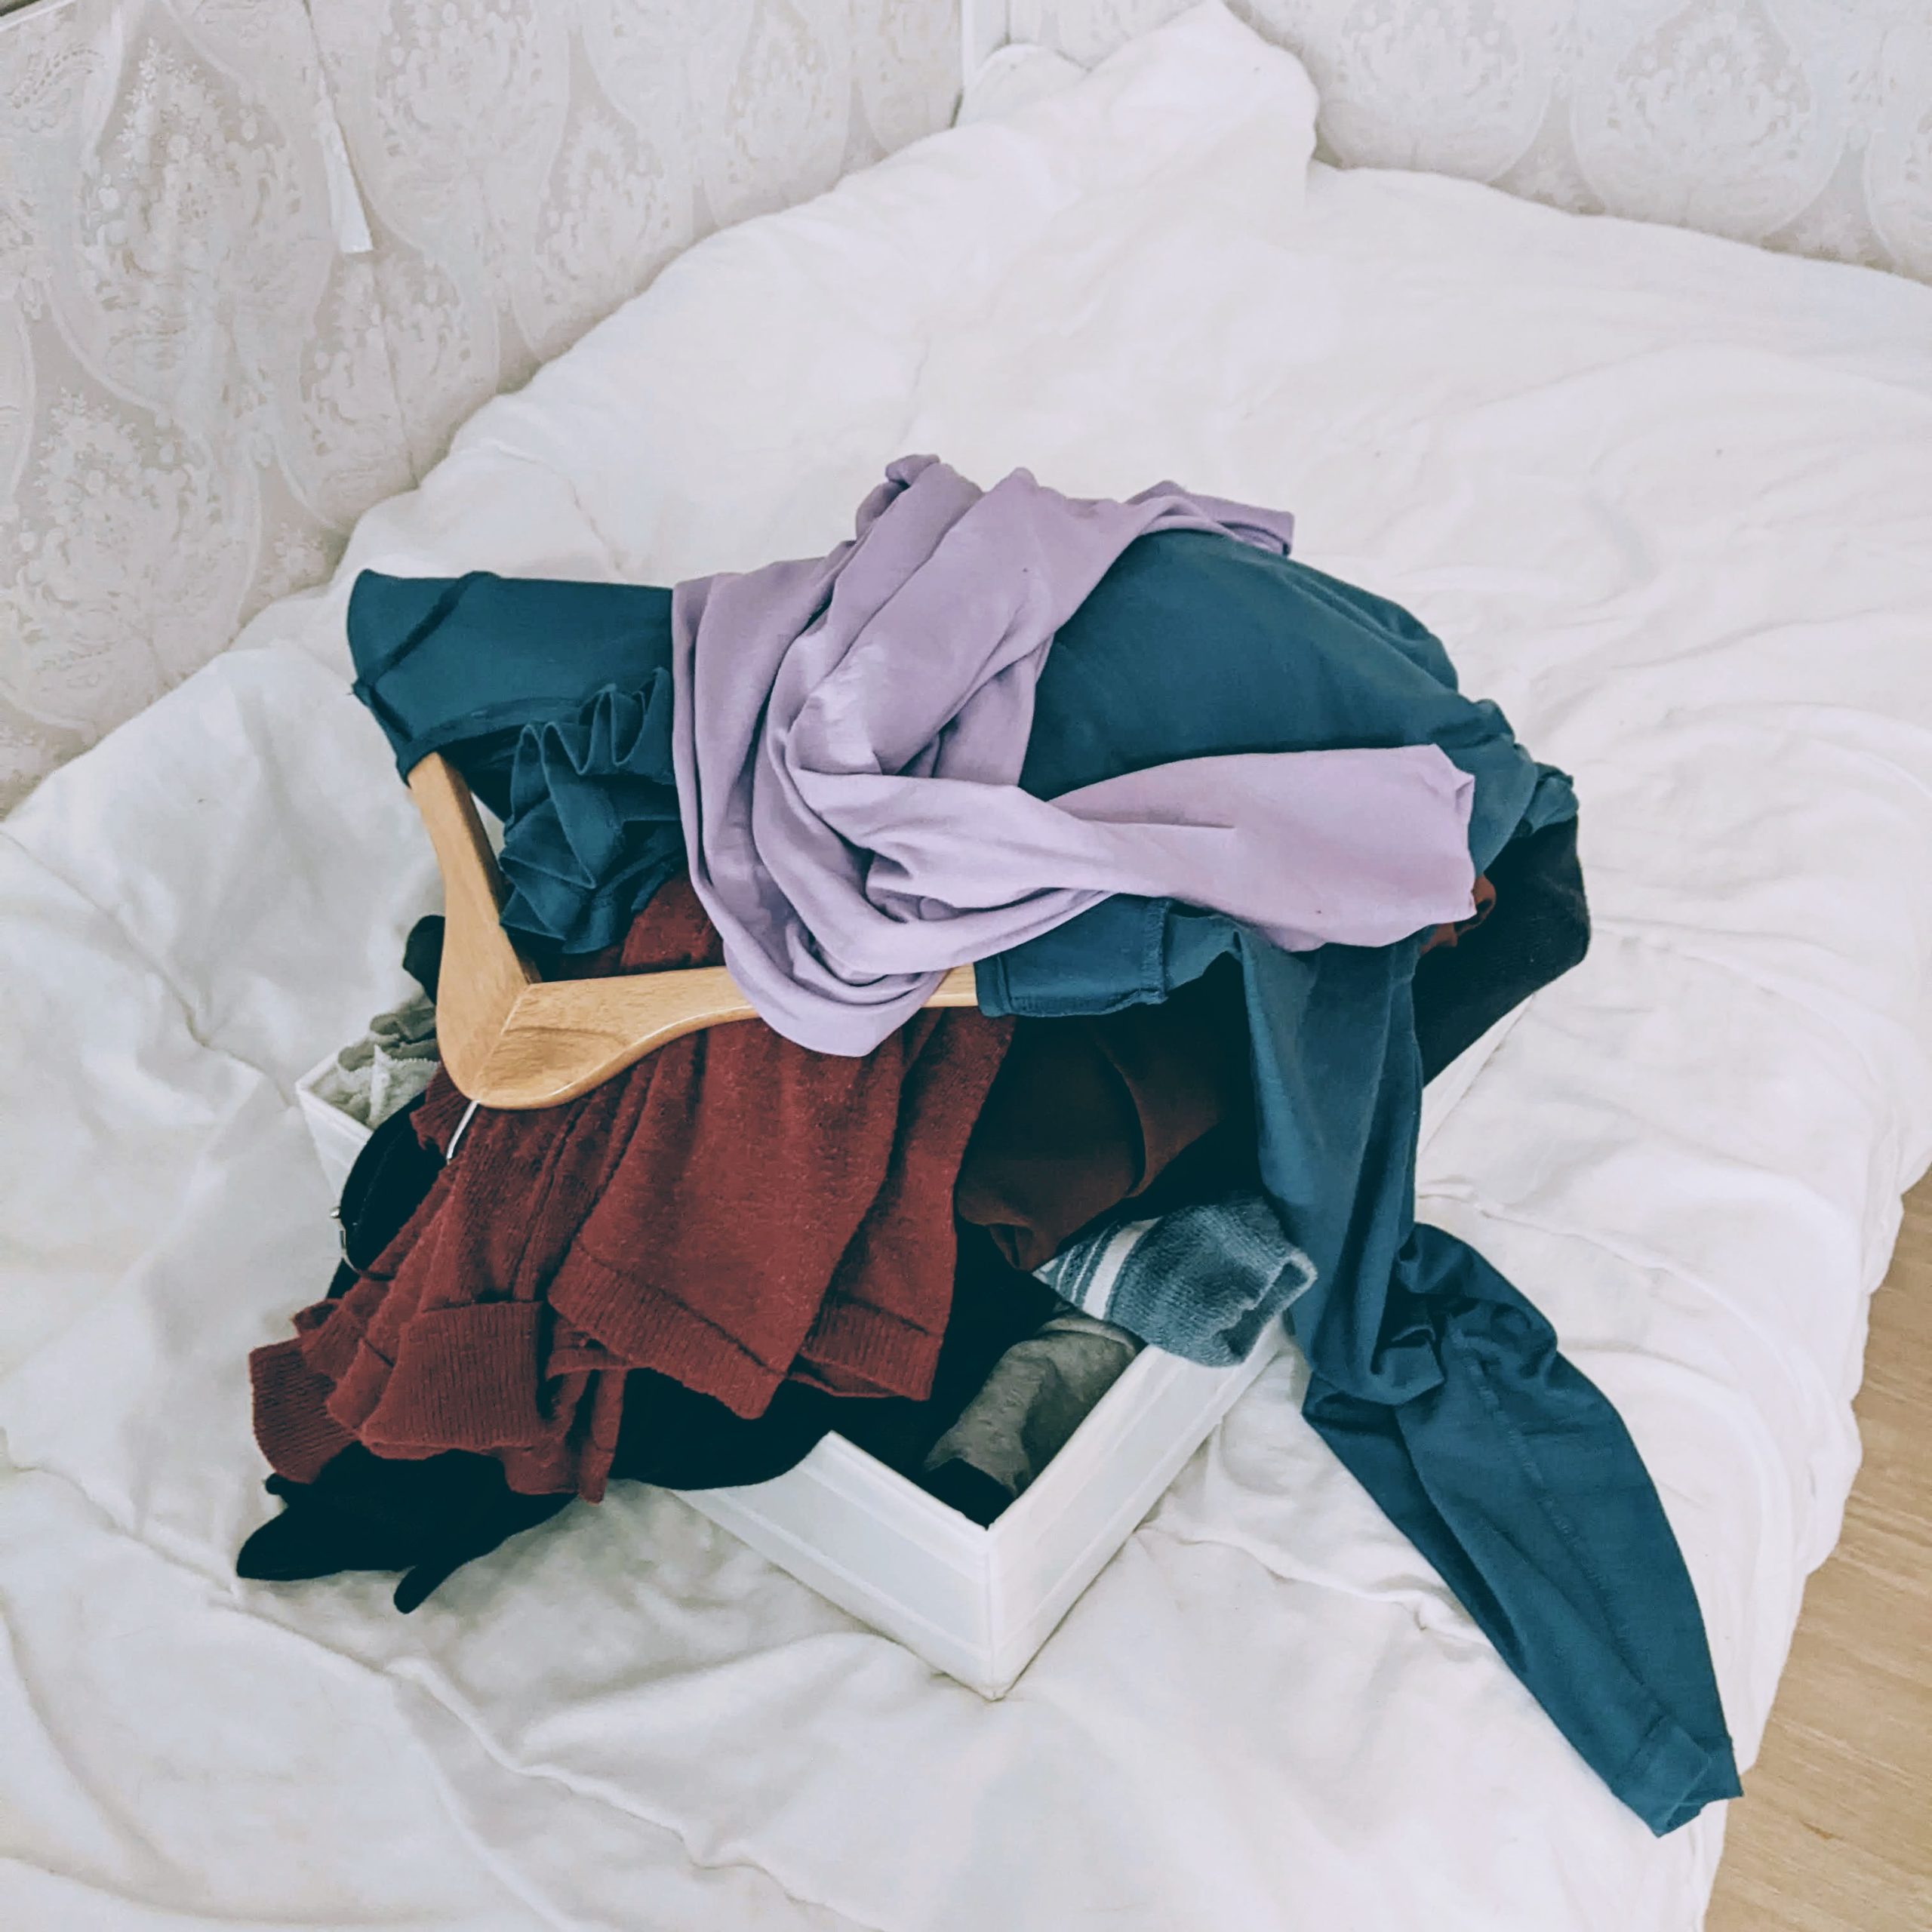 Pile of clothes on a bed